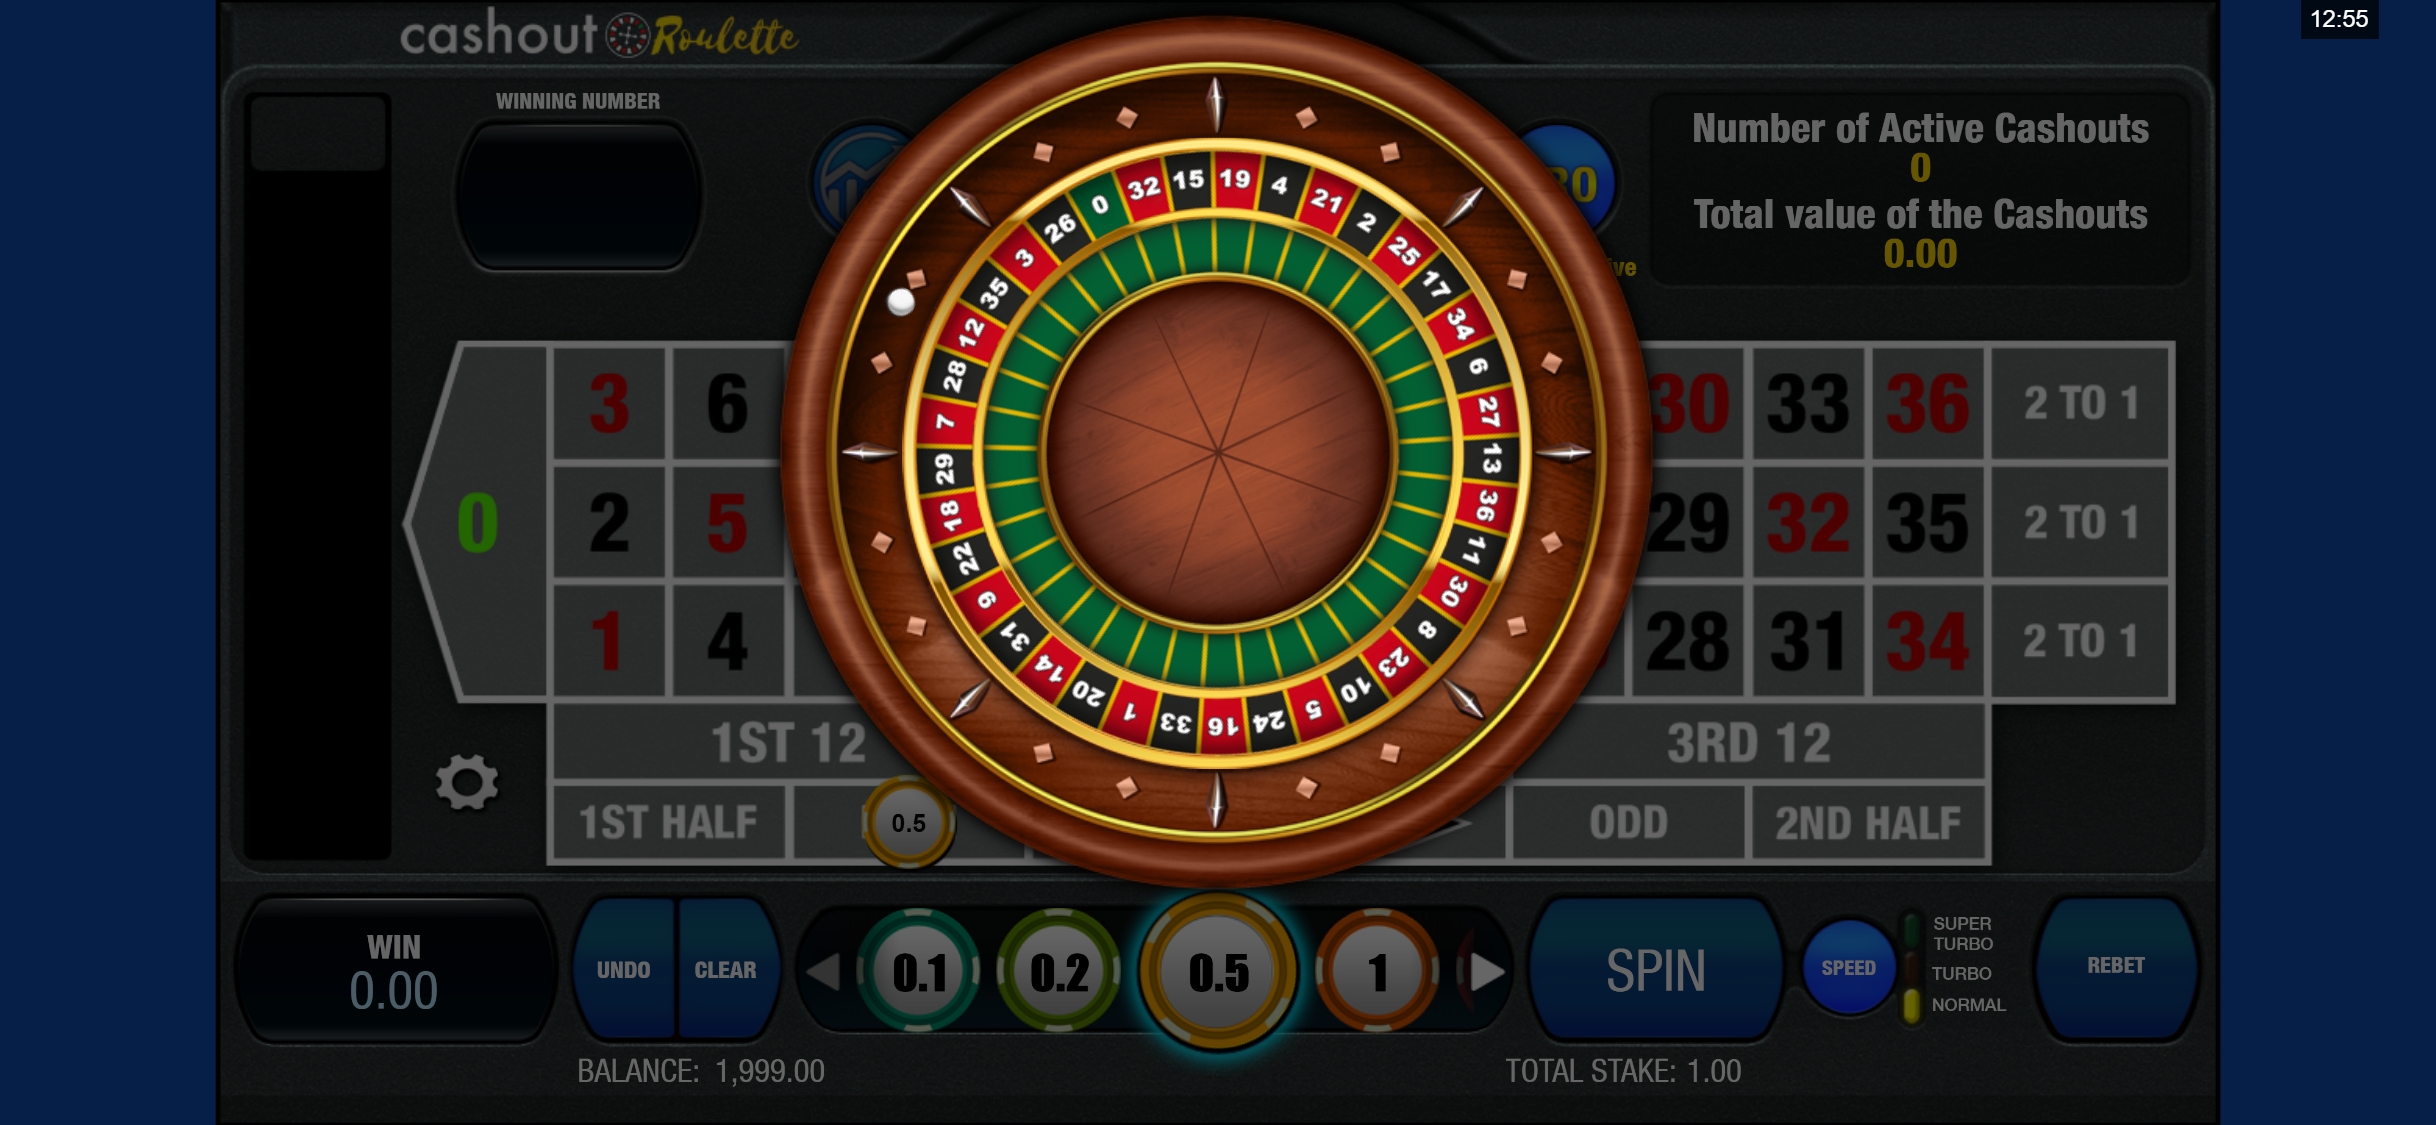 King Billy Casino Mobile Casino Games Review